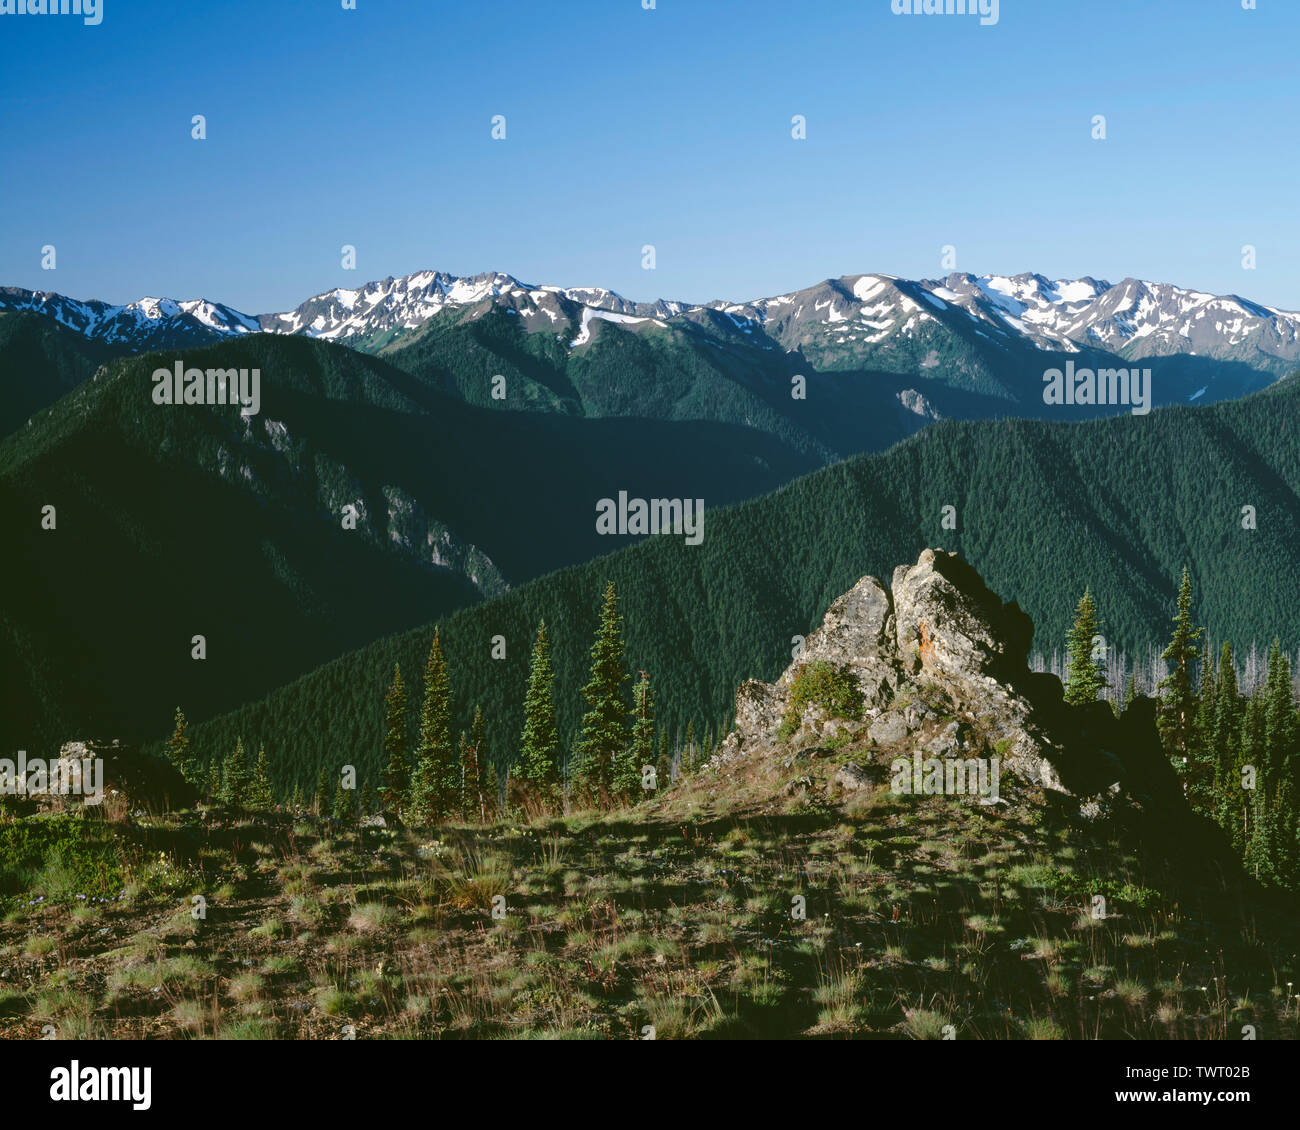 USA, Washington, Olympic National Park, Peaks and ridges of eastern Olympic Mountains, view south from Blue Mountain. Stock Photo